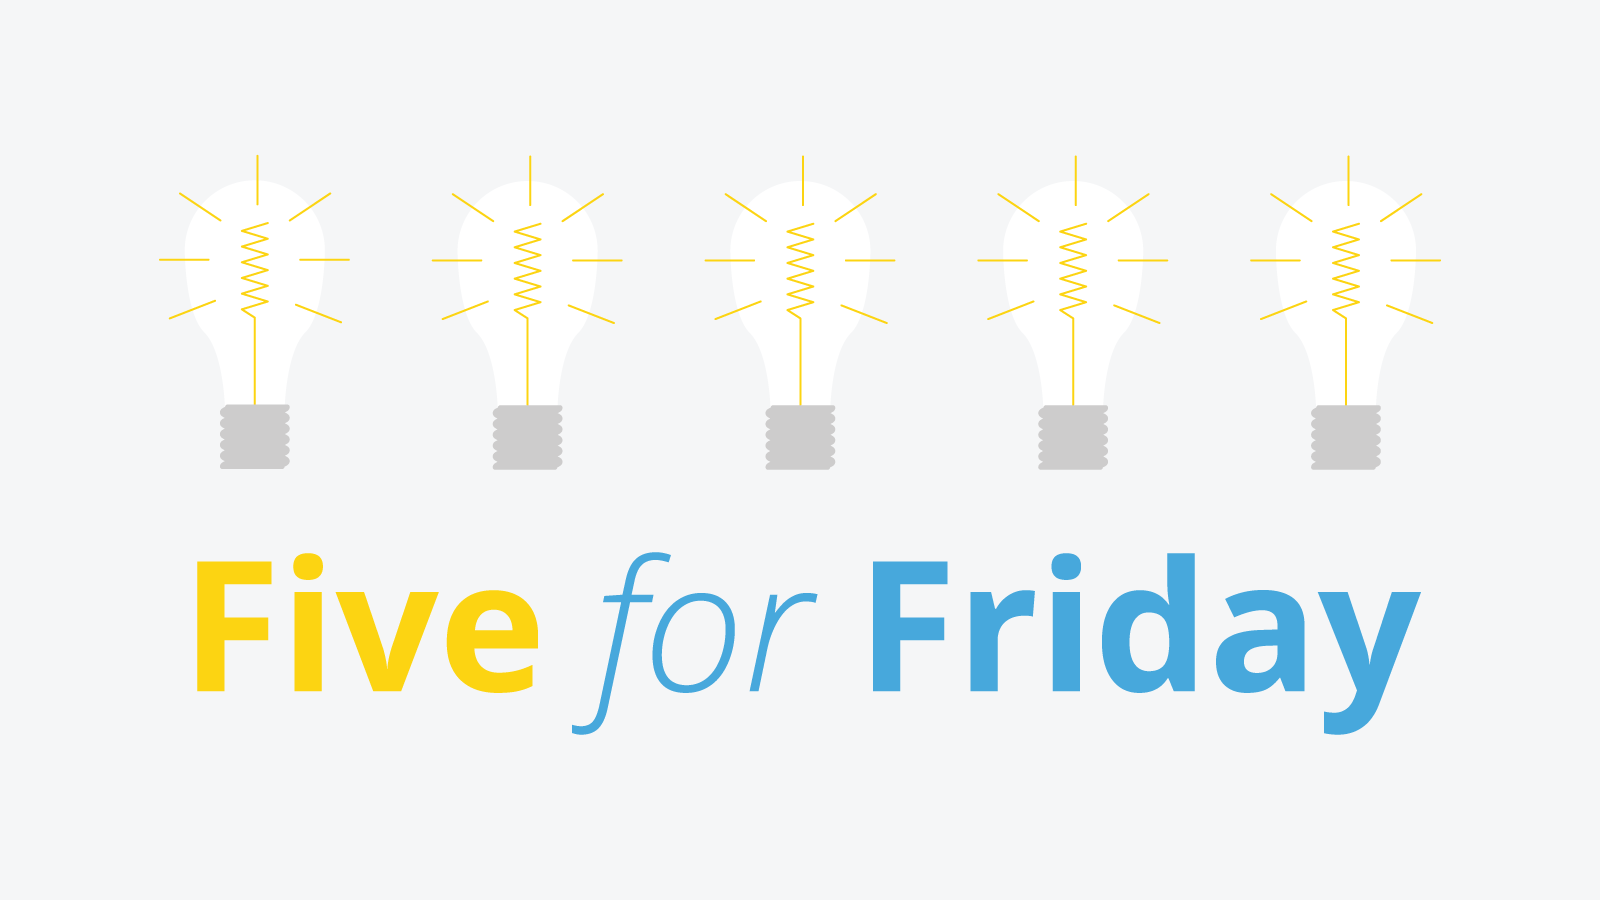 Five for Friday: Culture & values